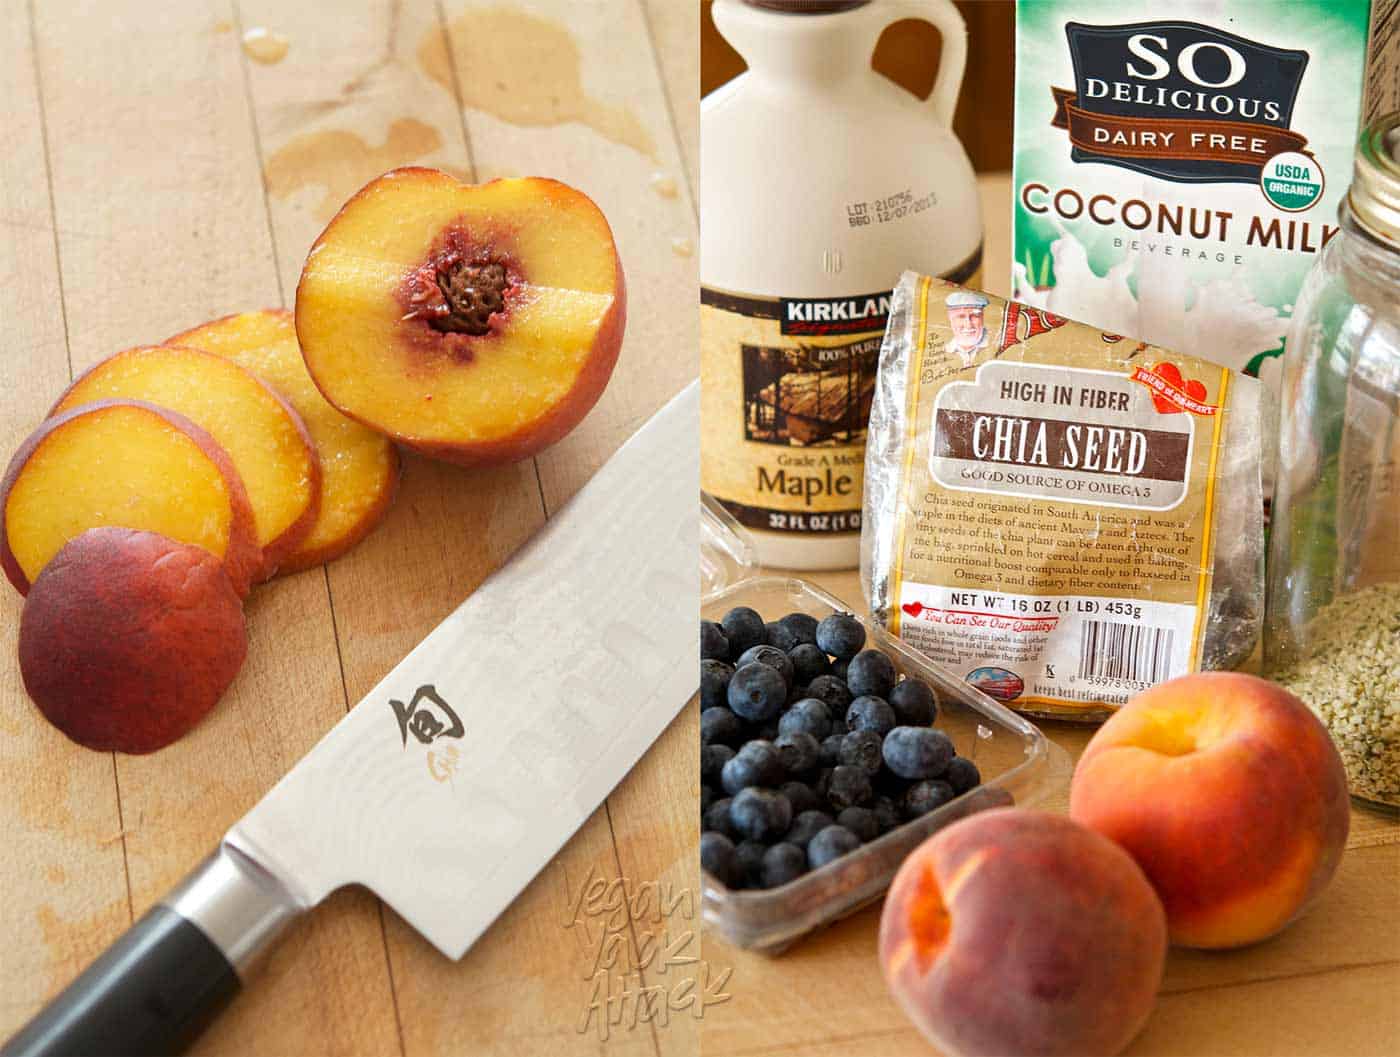 Image collage of sliced peaches and chia pudding ingredients